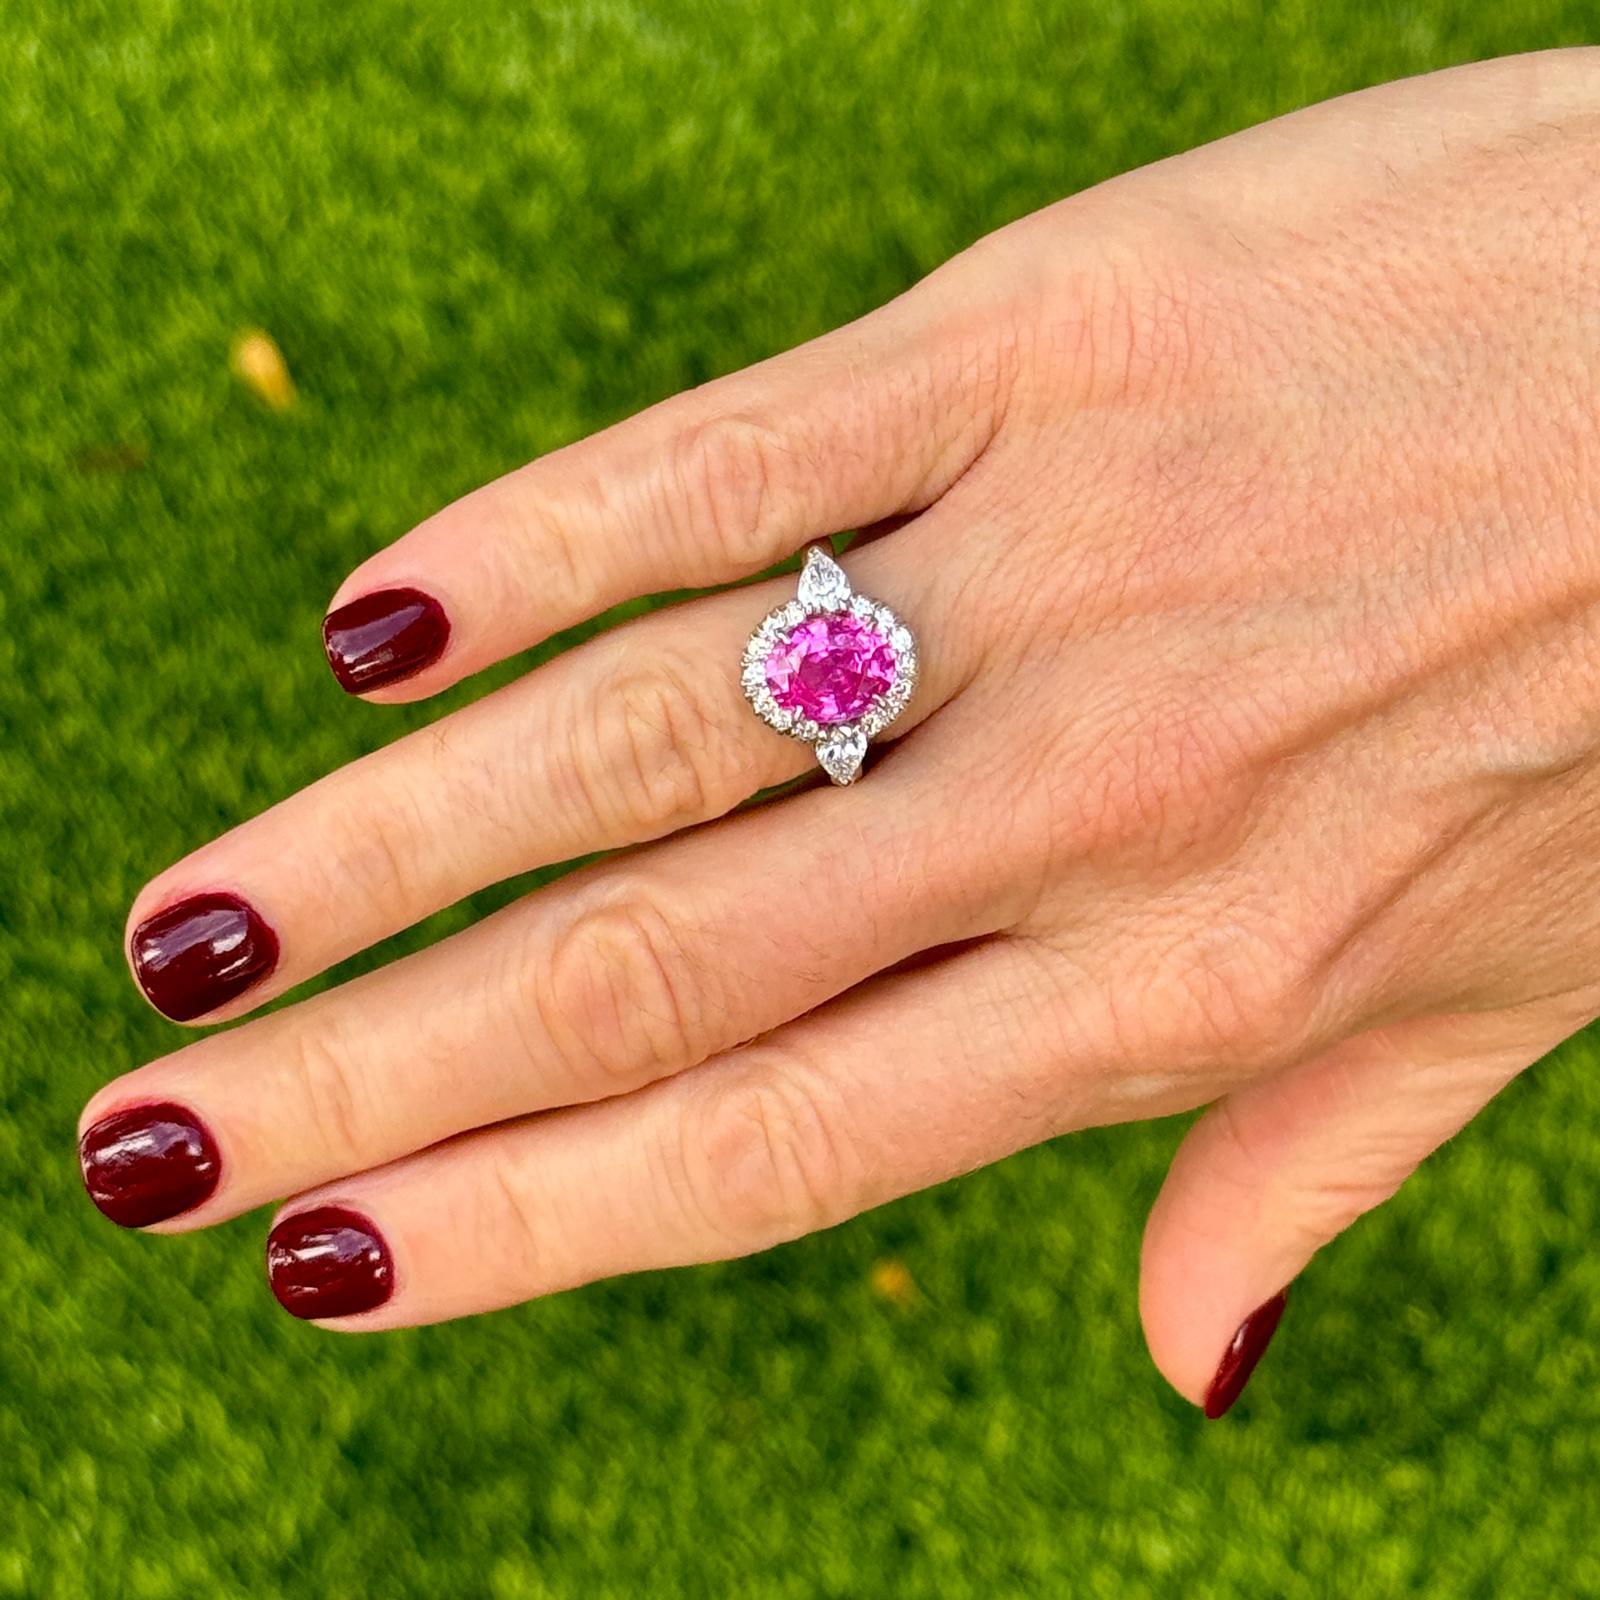 Stunning pink sapphire diamond cocktail ring by Oscar Heyman handcrafted in platinum. The ring features an oval pink sapphire gemstone weighing 3.60 carat flanked by two pear shape diamonds weighing .80 CTW and 14 round brilliant cut diamonds